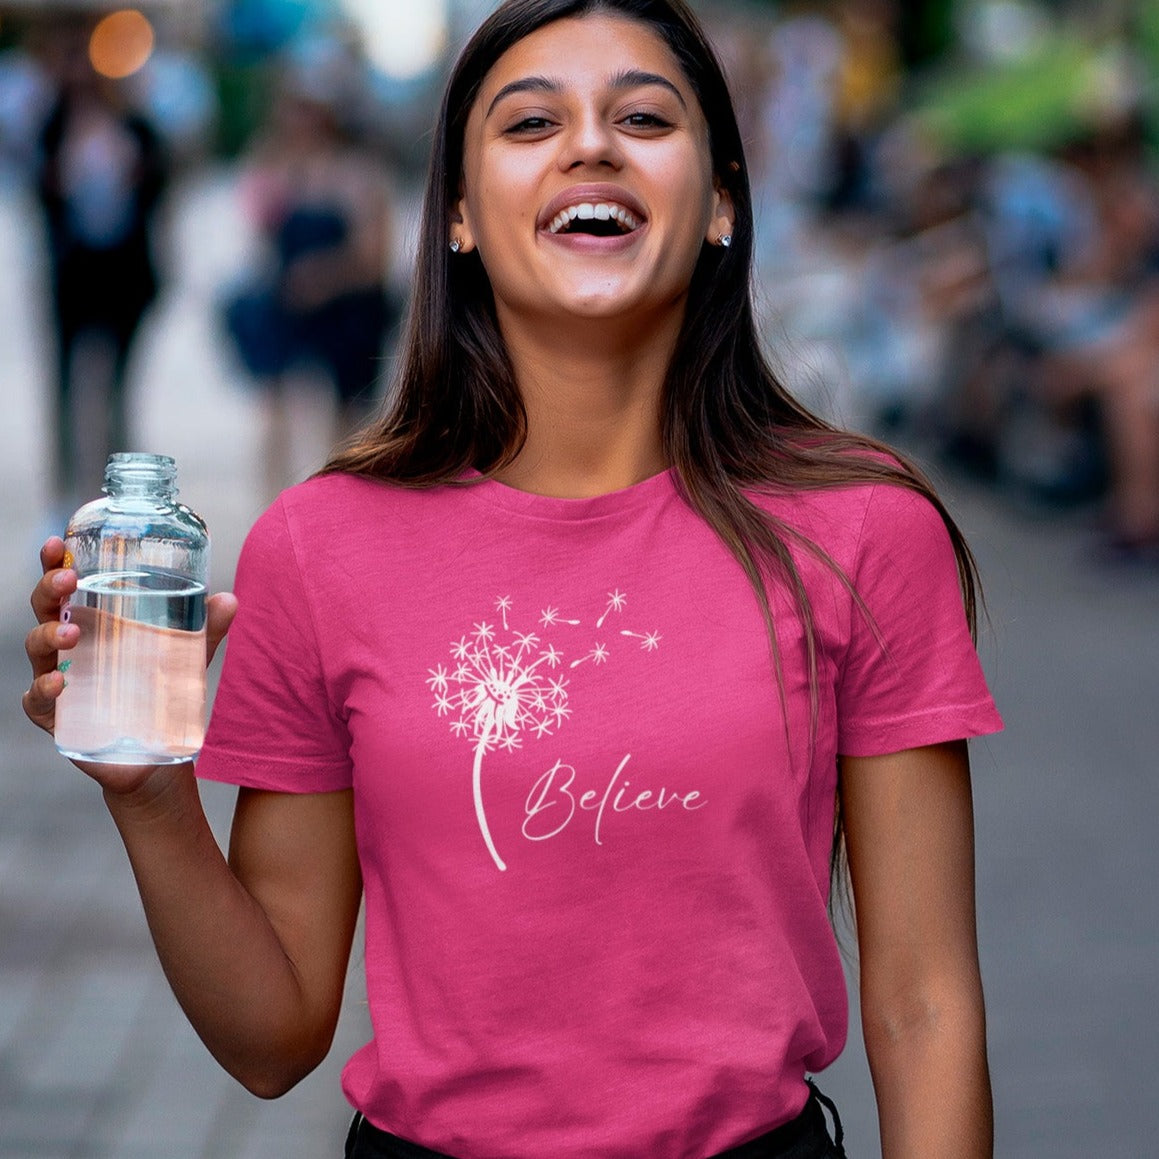 believe-with-dandelion-wishes-berry-t-shirt-womens-inspiring-tee-mockup-of-a-joyful-woman-holding-a-glass-of-water